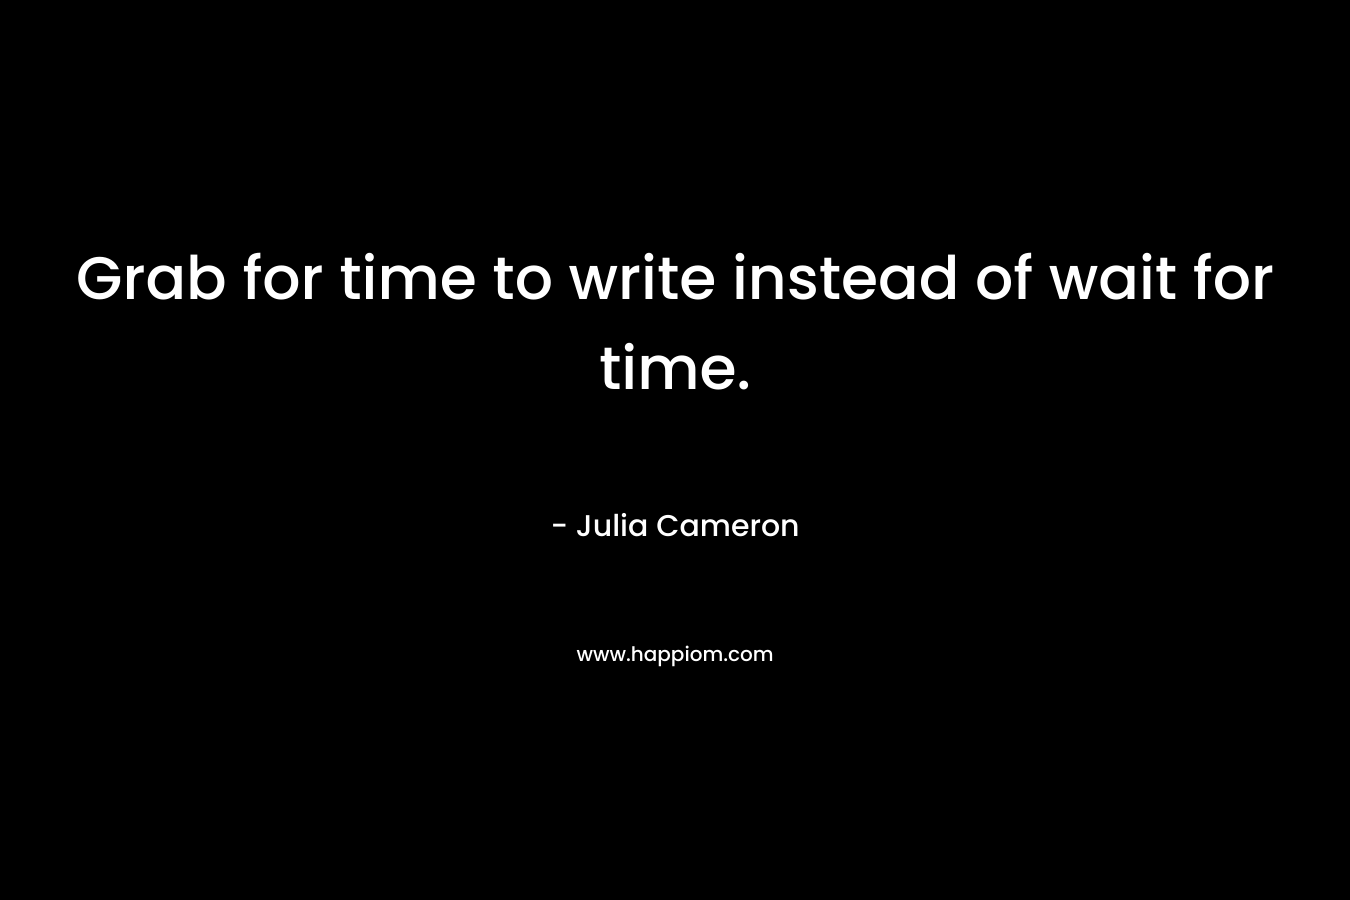 Grab for time to write instead of wait for time. – Julia Cameron